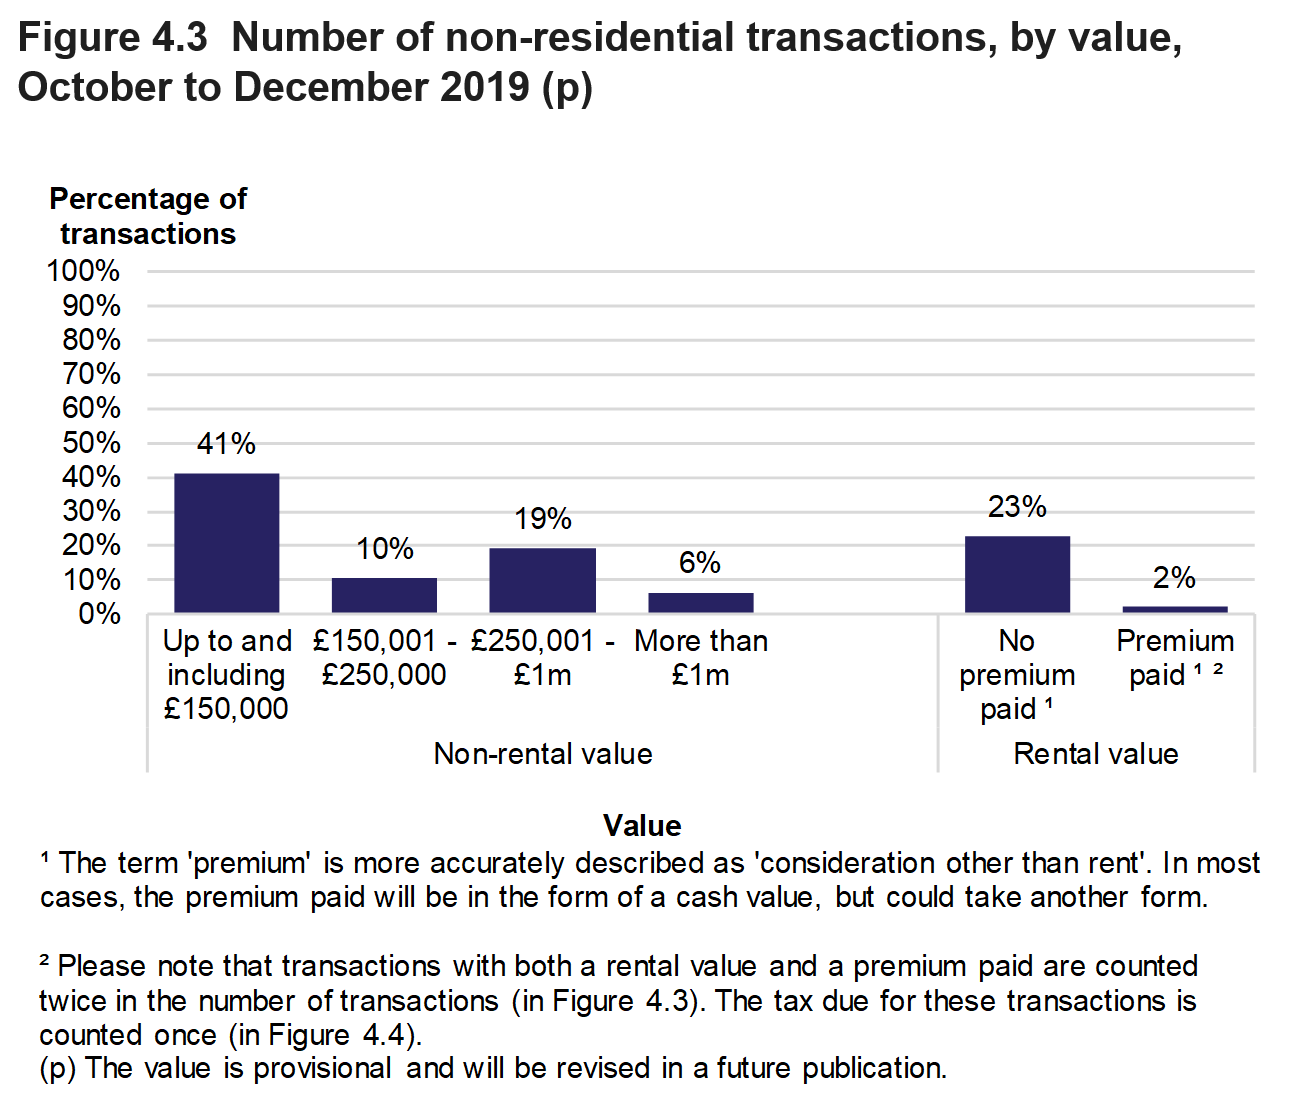 Figure 4.3 shows the number of non-residential transactions by value of the property. Data is presented as the percentage of transactions and relates to transactions effective in October to December 2019.